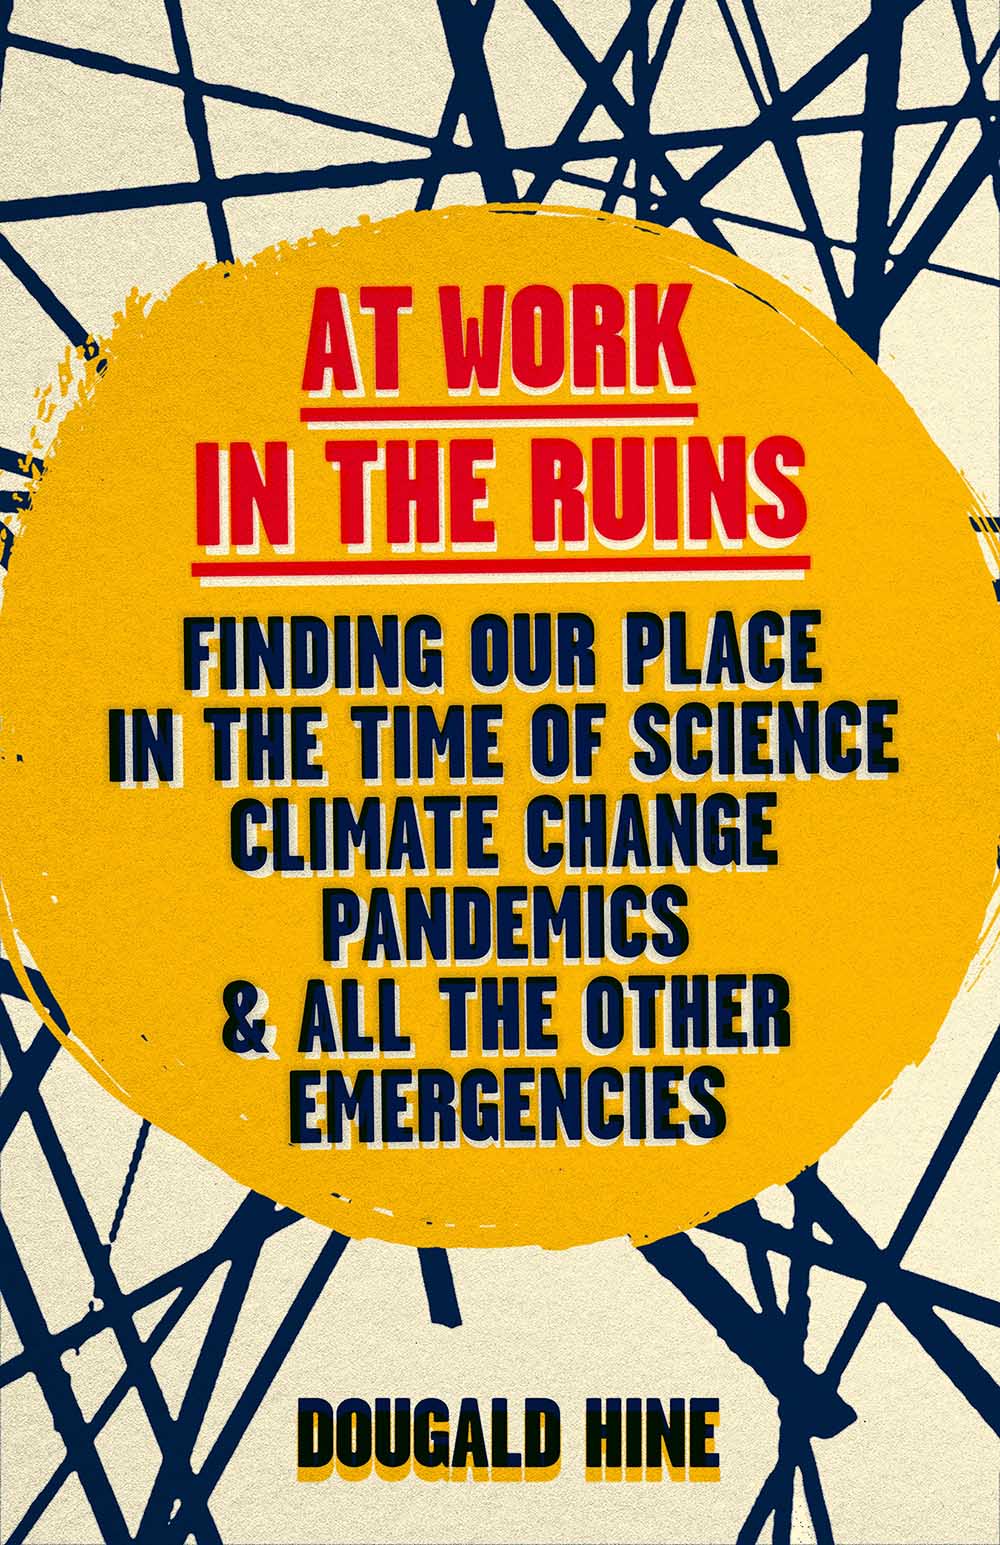 At Work in the Ruins book jacket